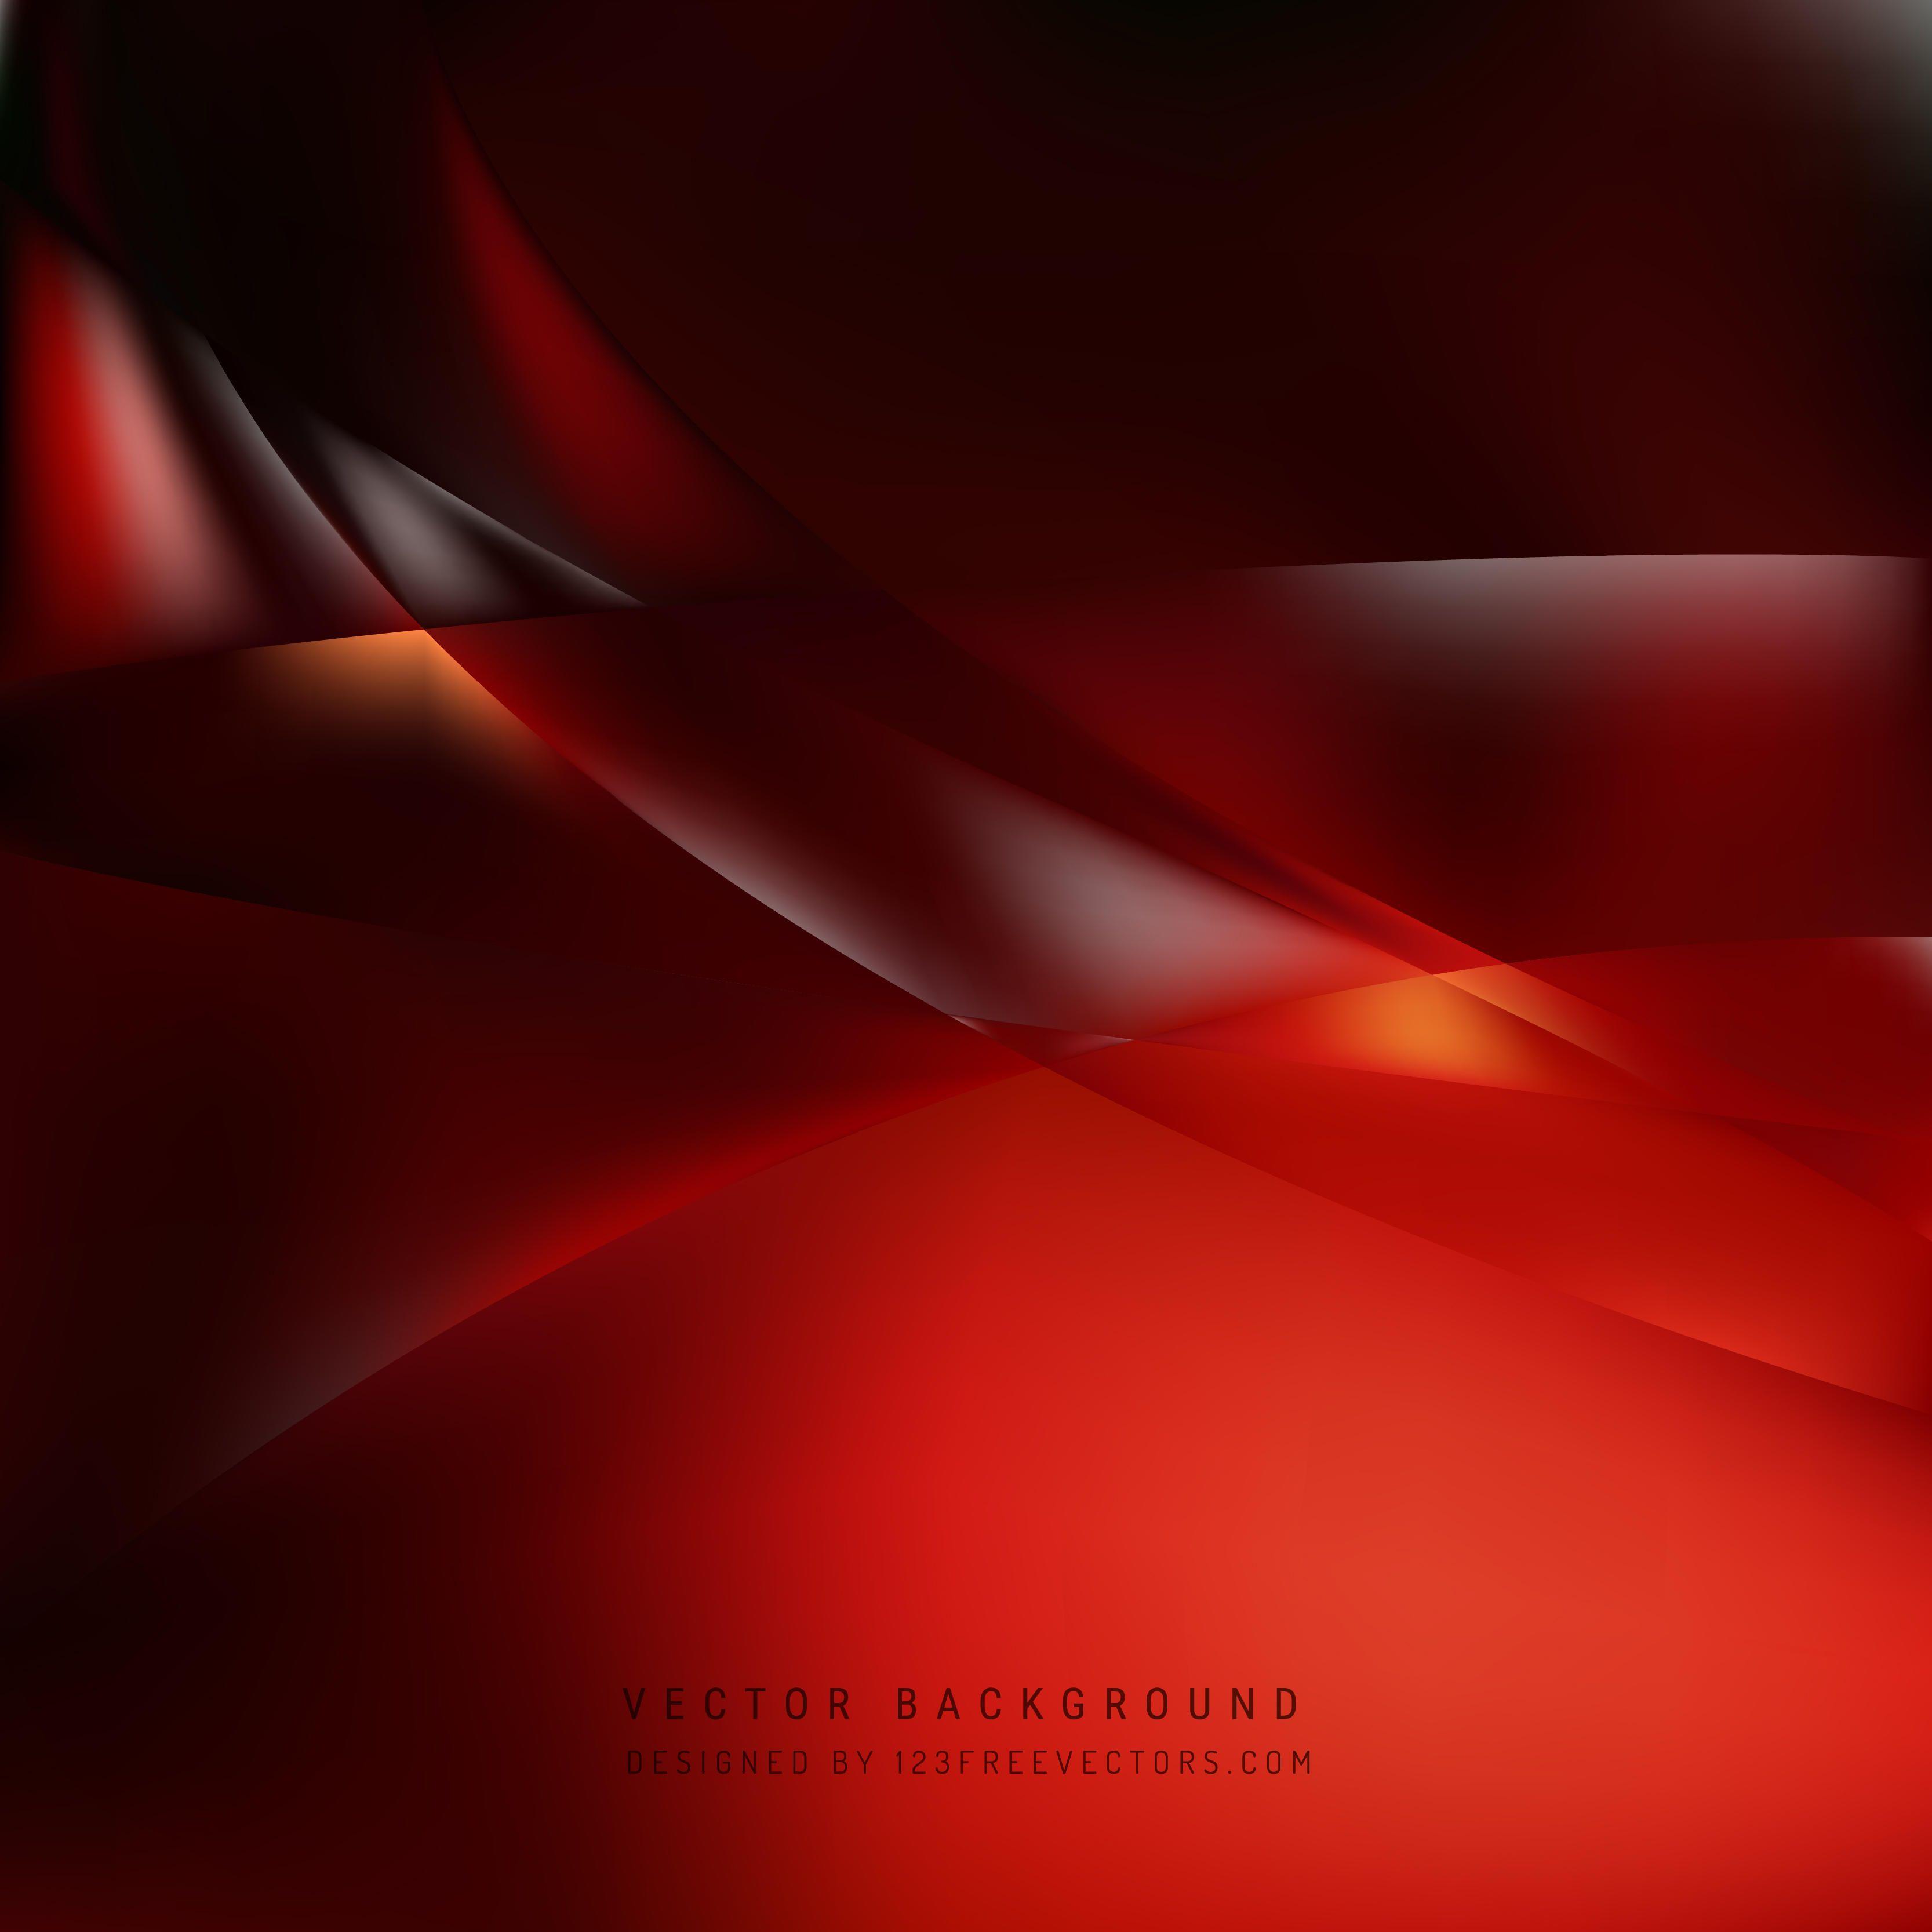 Red Black BackgroundFreevectors